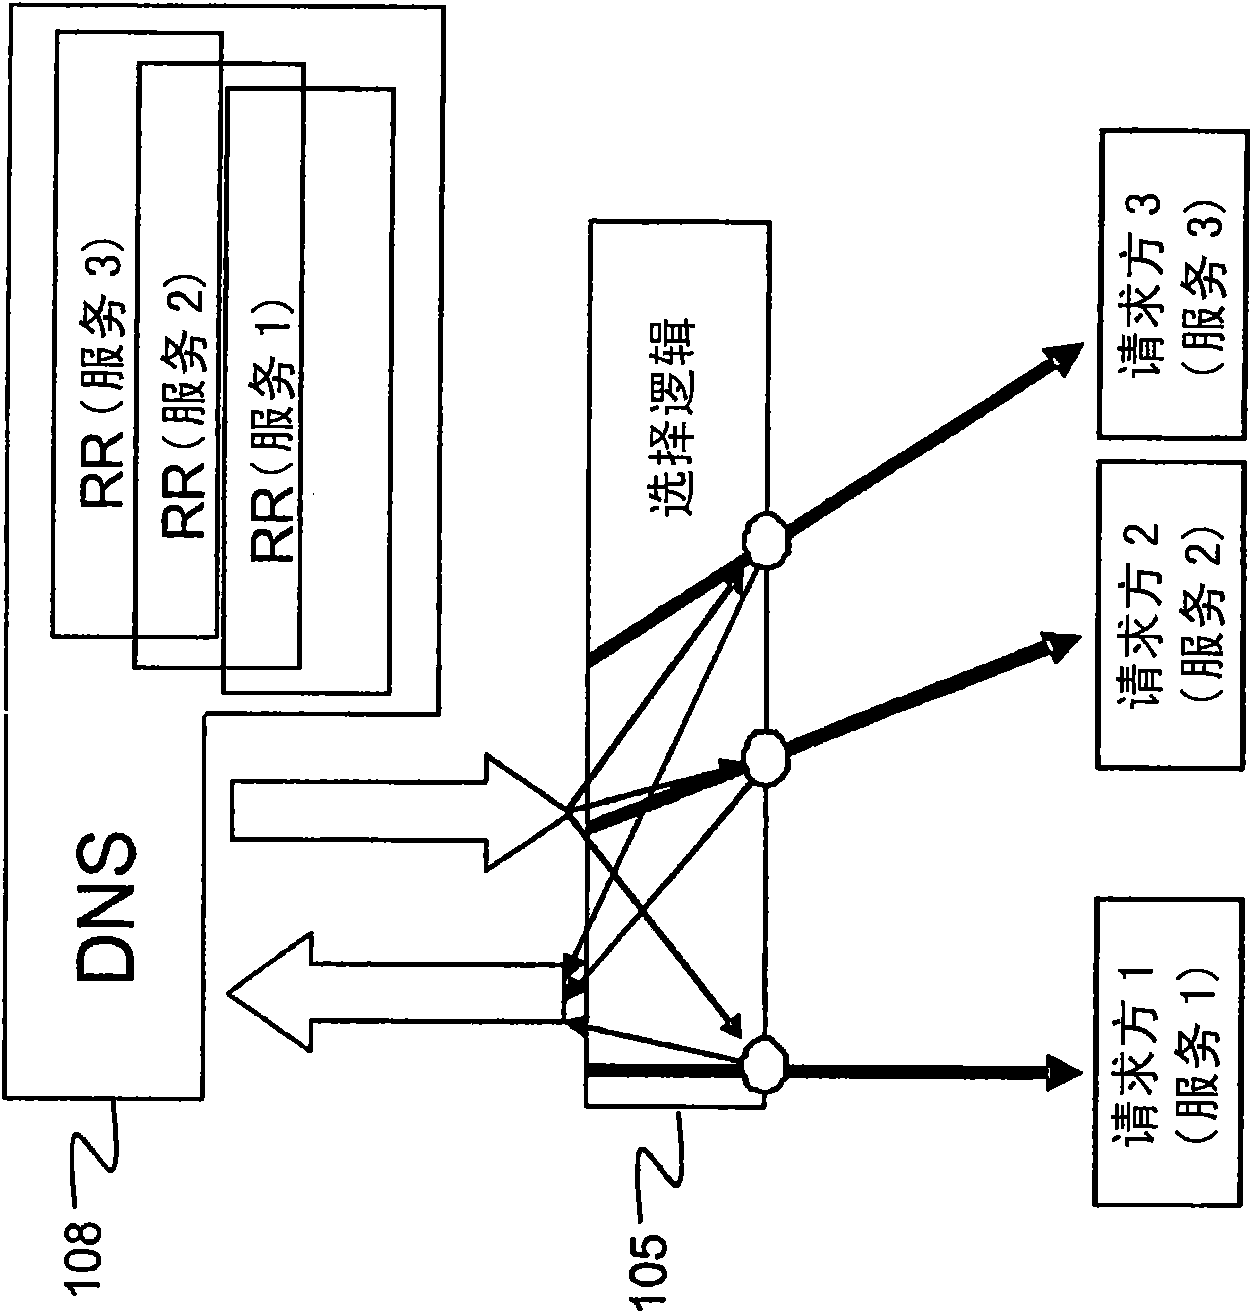 Selection of an edge node in a fixed access communication network